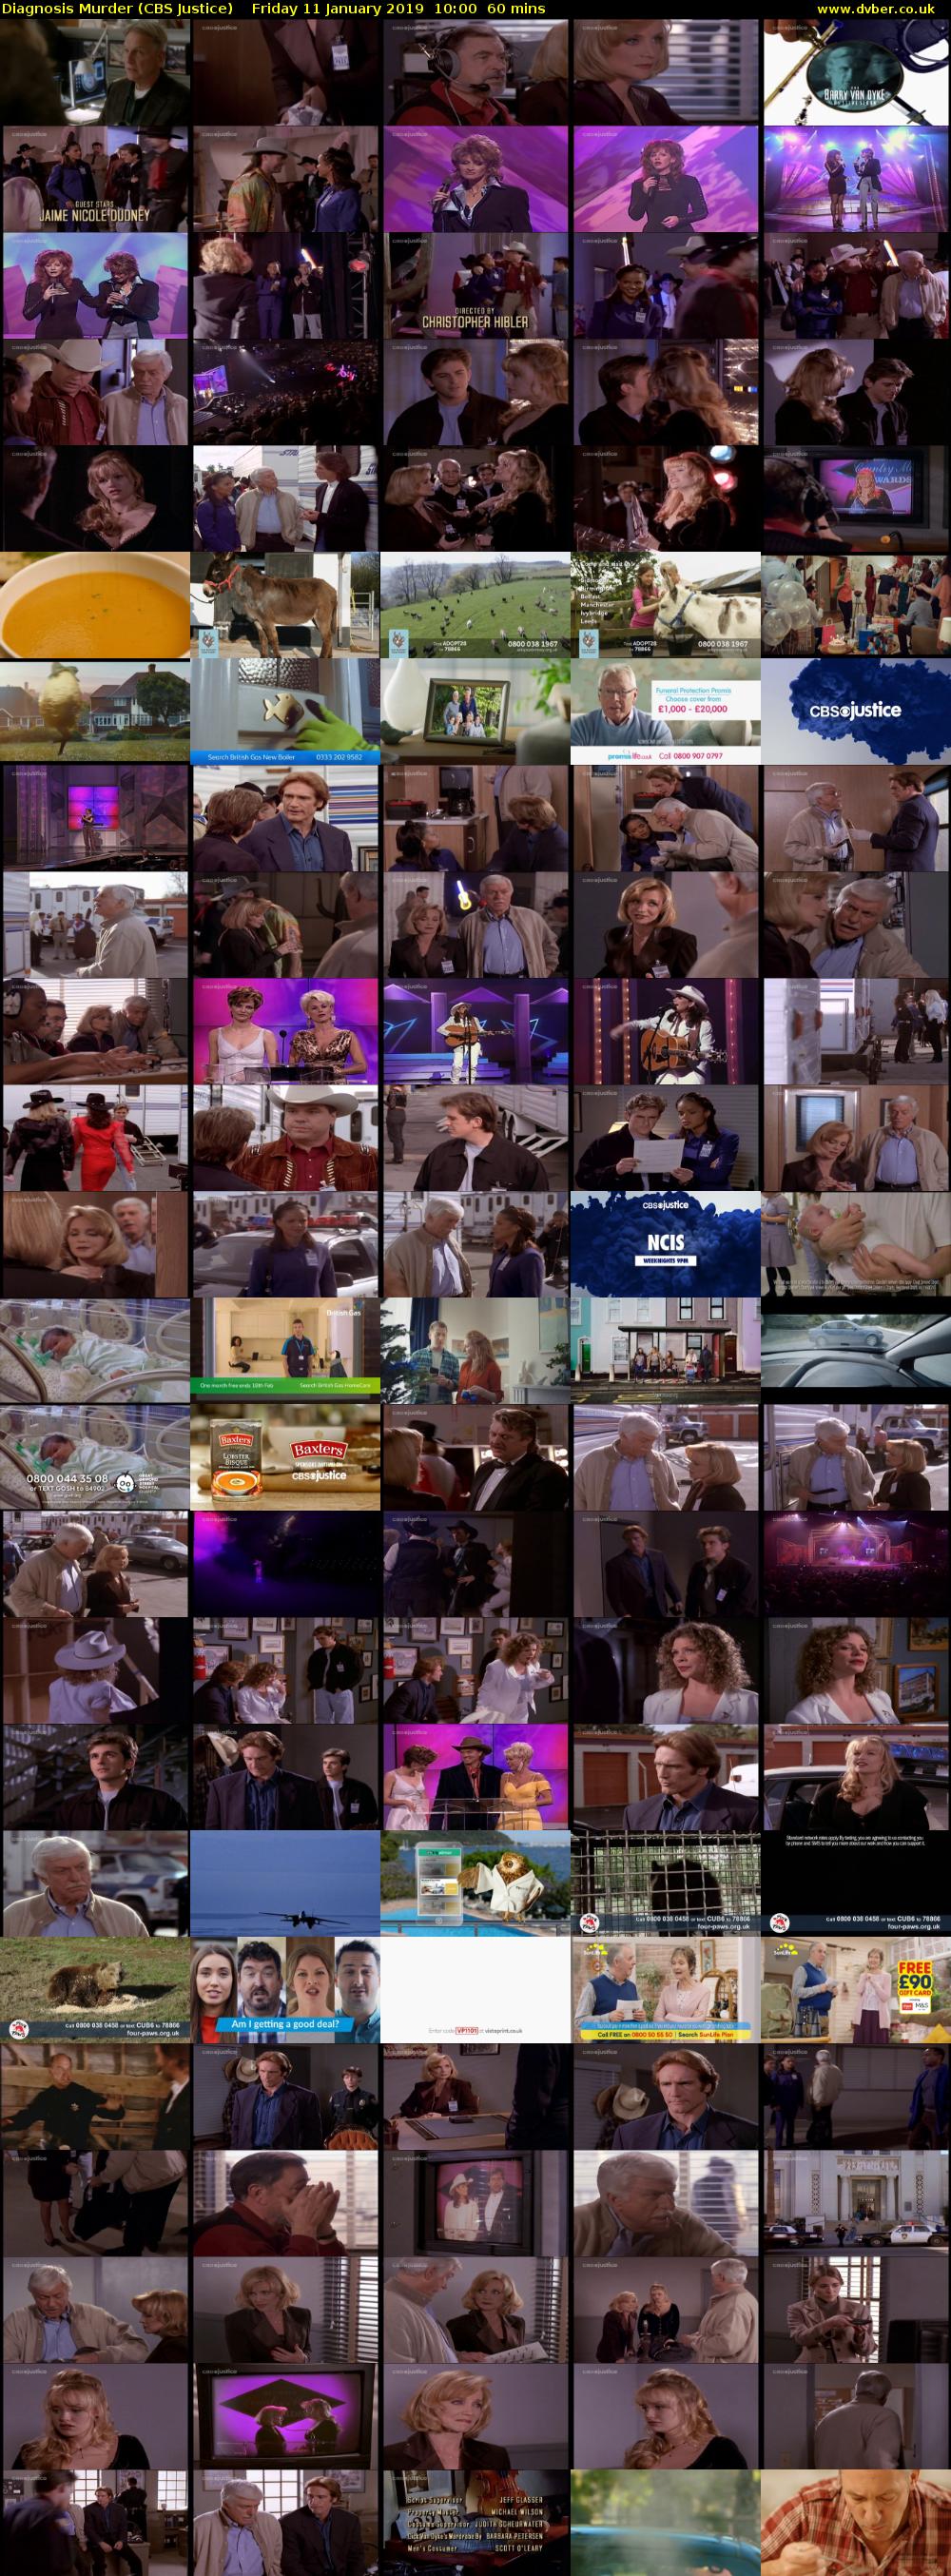 Diagnosis Murder (CBS Justice) Friday 11 January 2019 10:00 - 11:00